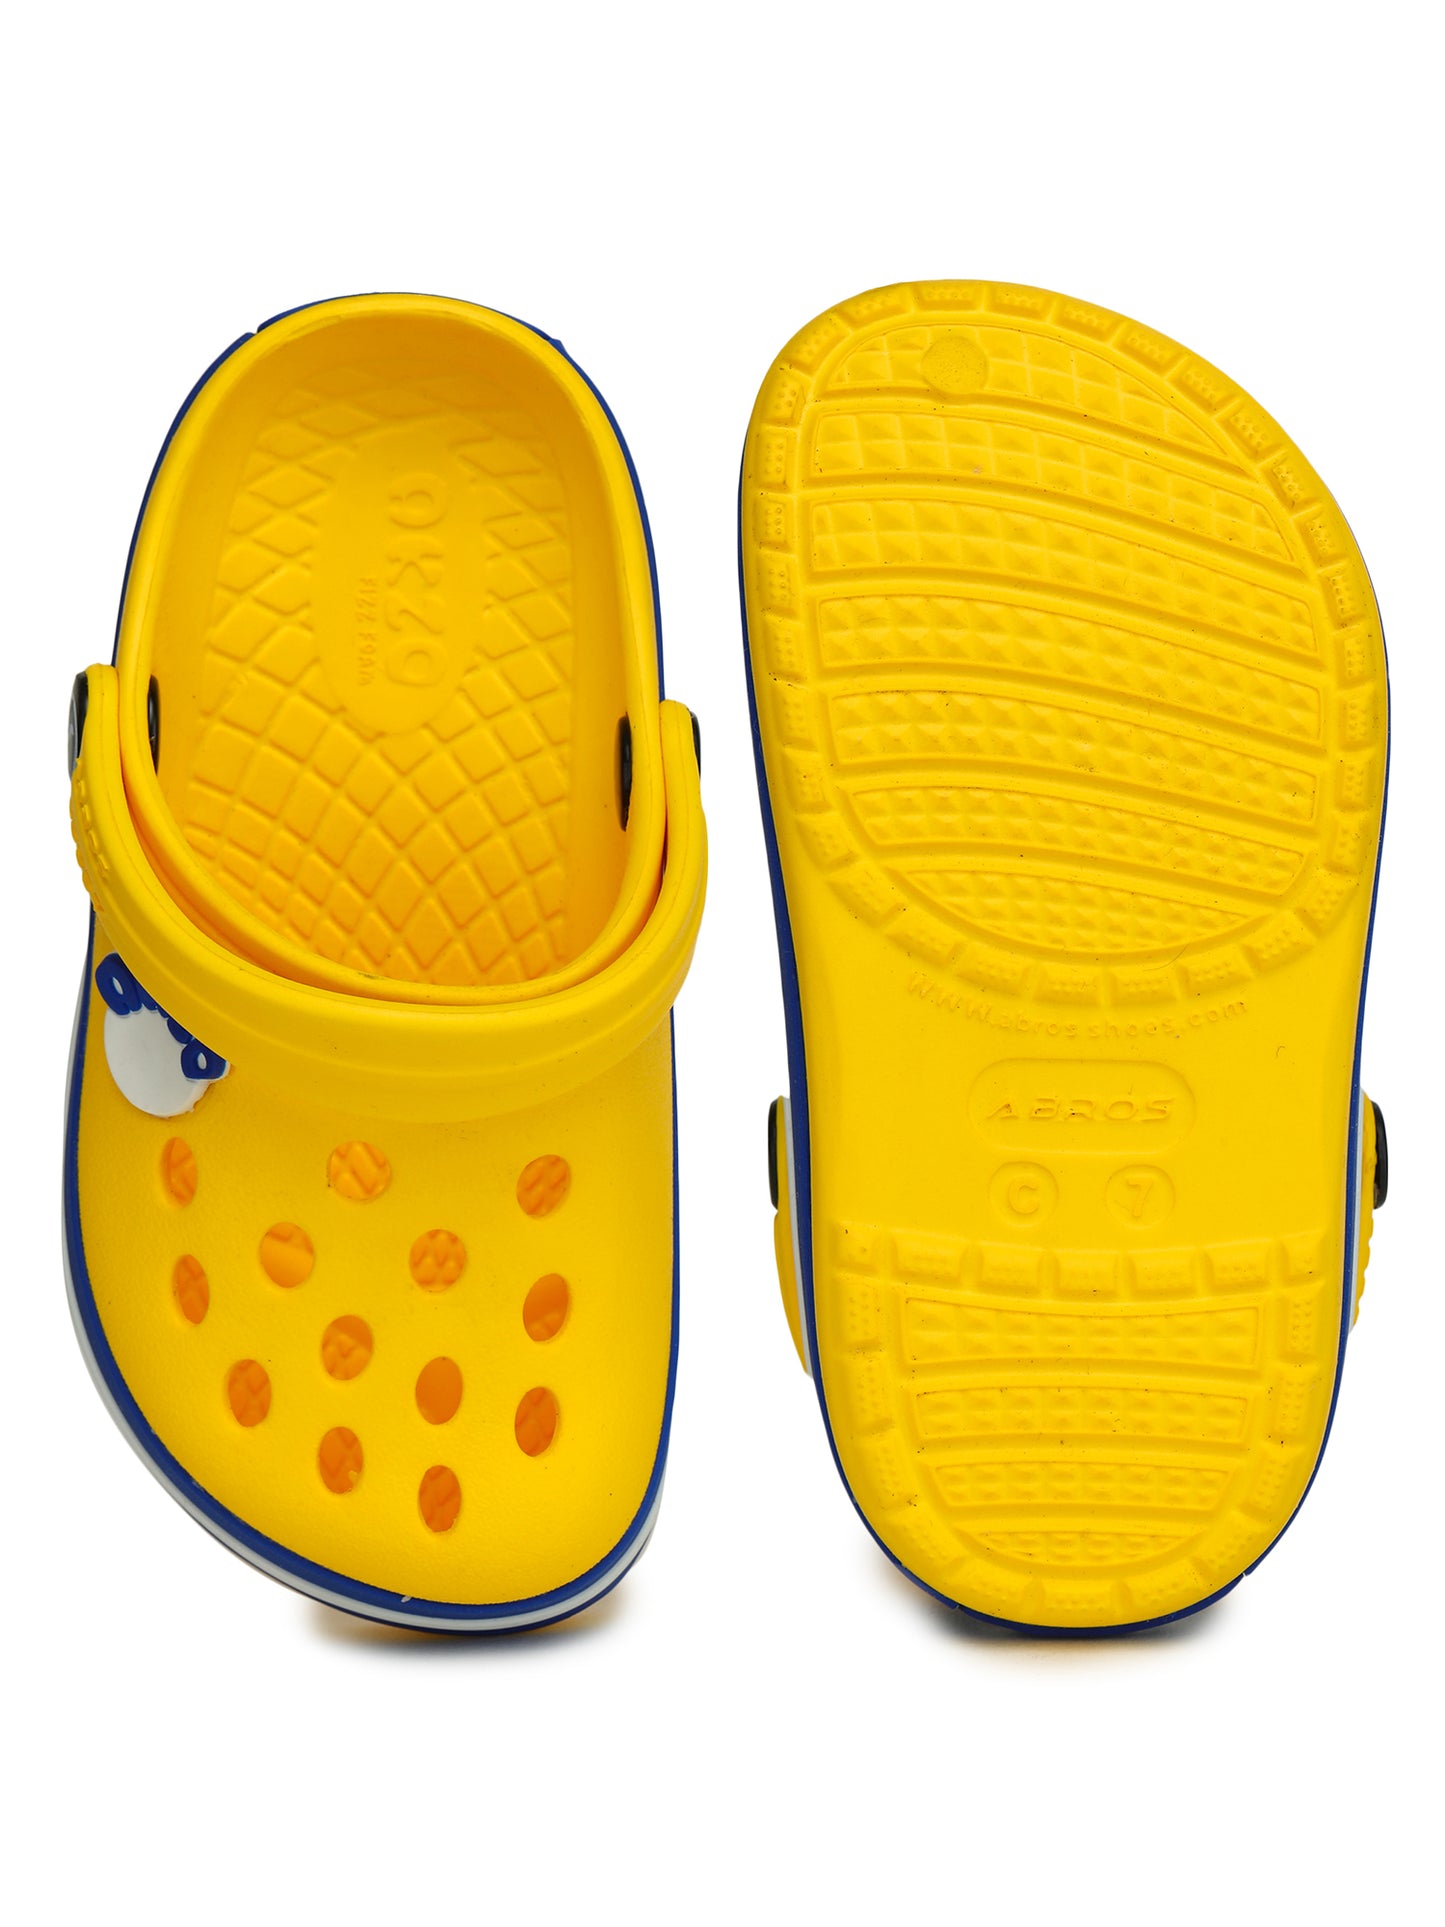 ABROS ZCK-0801 CLOGS FOR KIDS